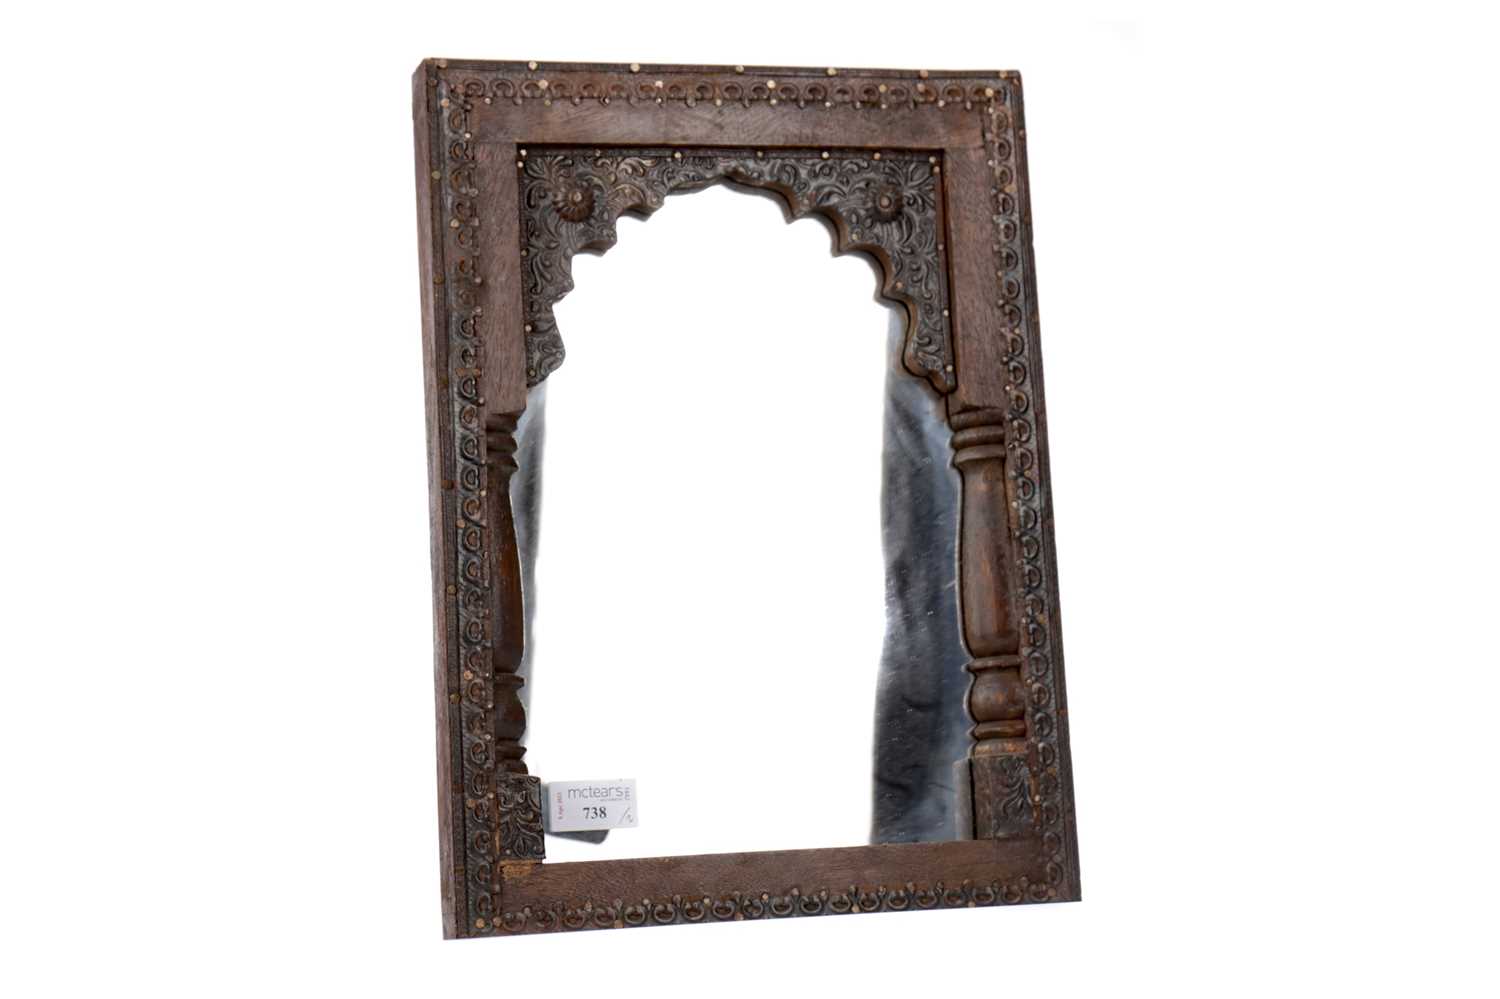 Lot 738 - A MOORISH CARVED WOOD FRAMED MIRROR AND A PLATED FLORAL PLAQUE